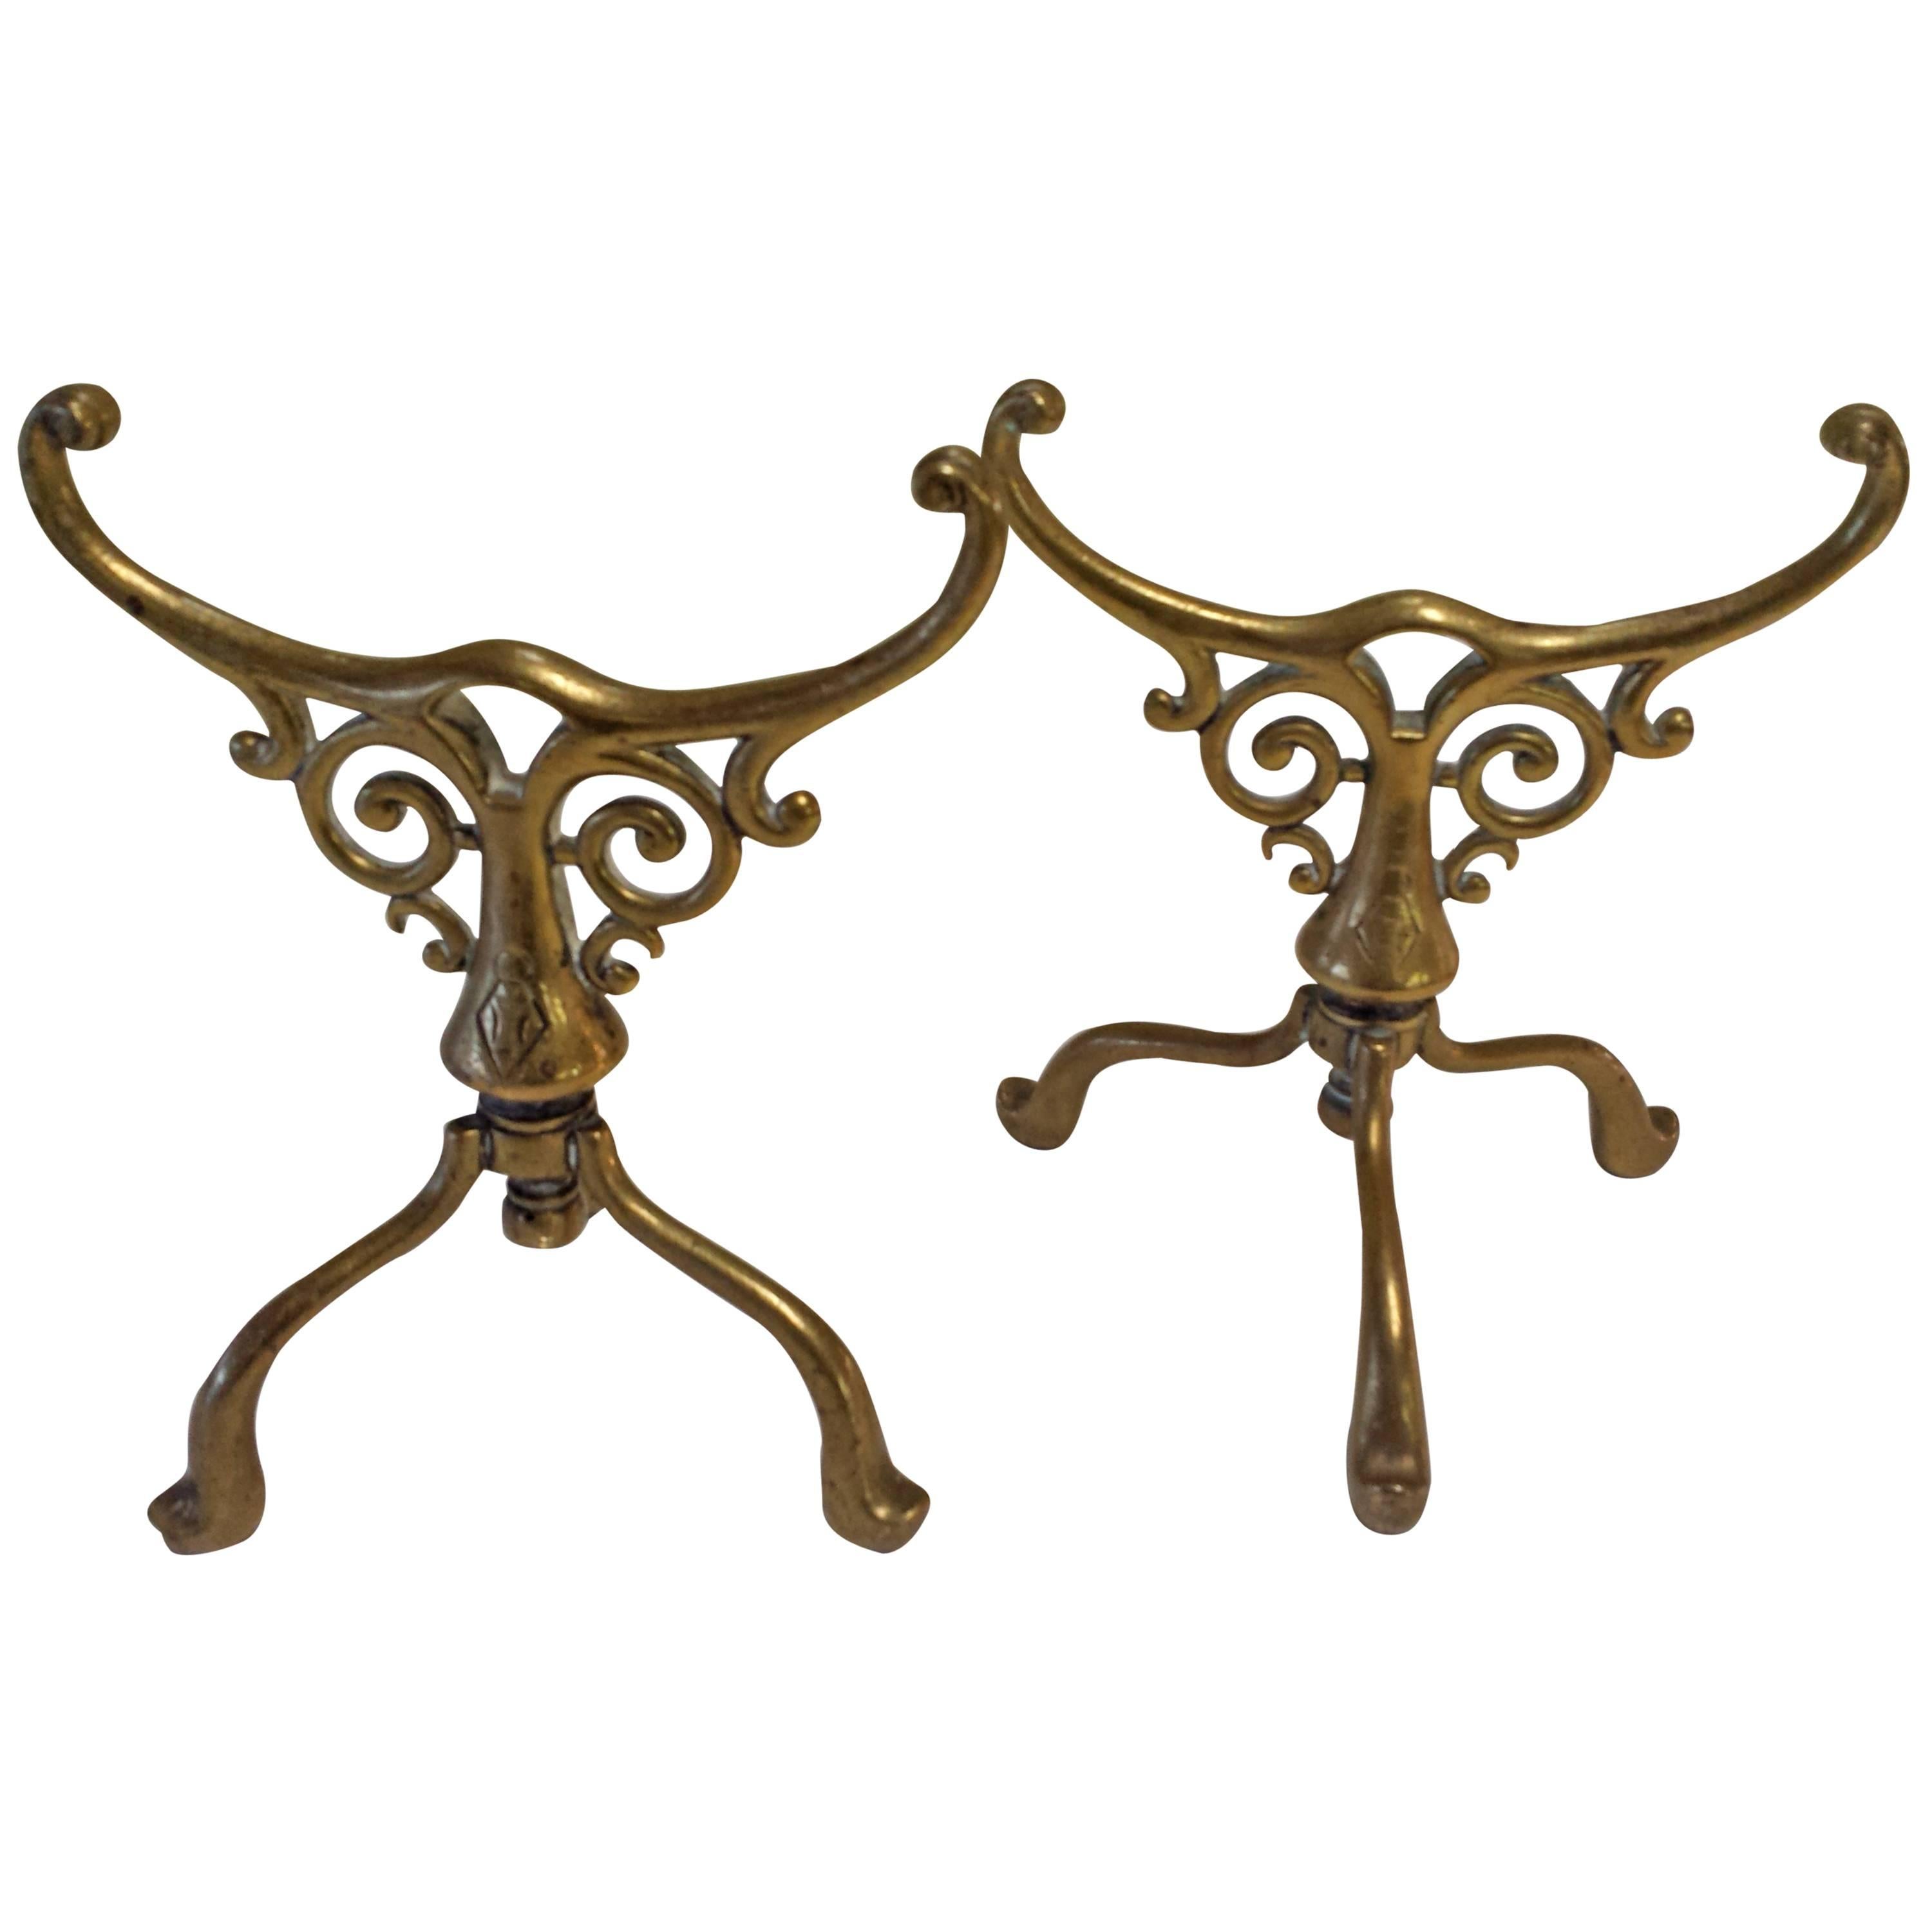 Victorian Fireplace Tool or Cooking Utensil Rests, British Registration Marks   For Sale